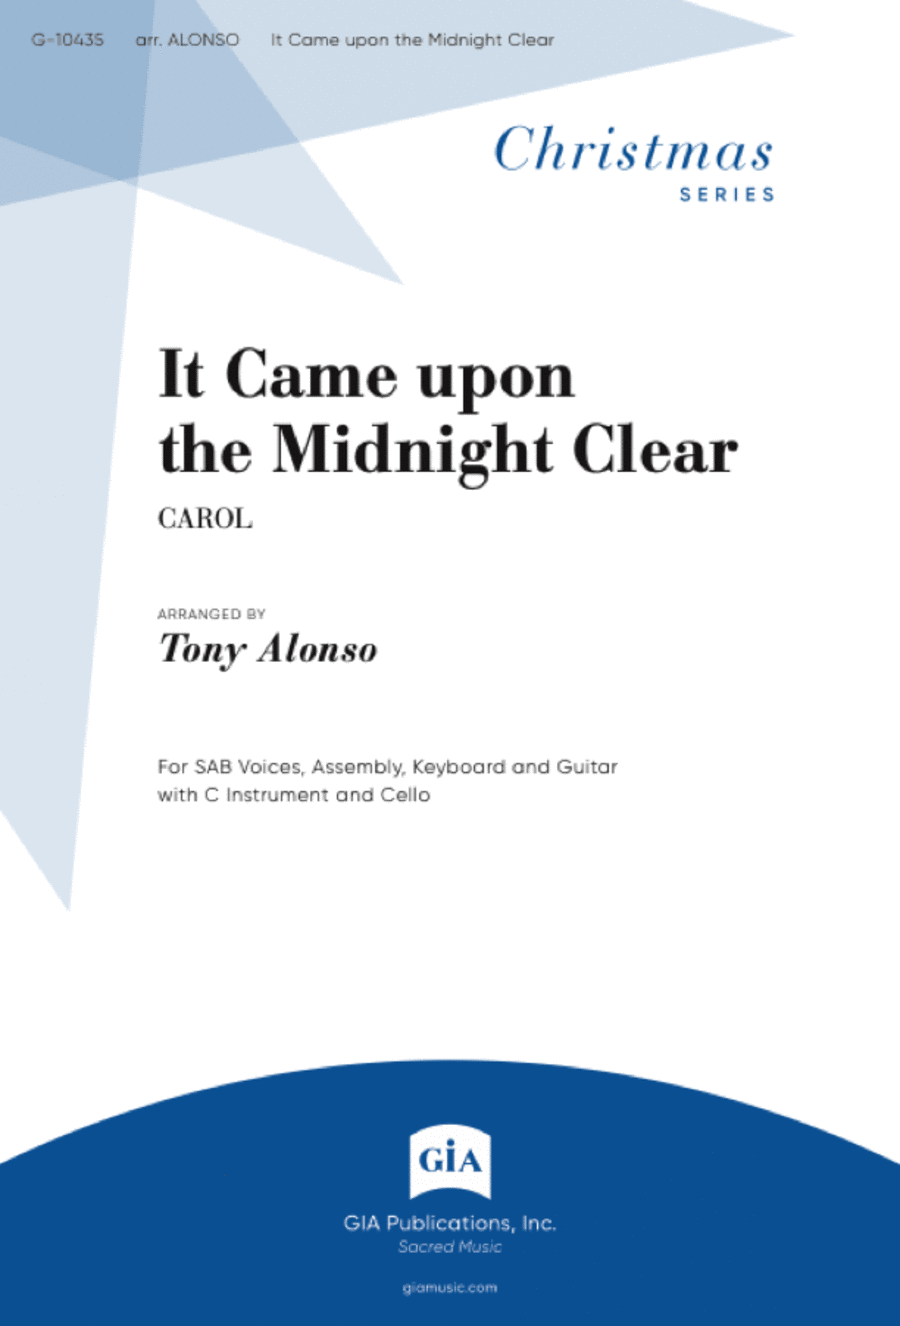 It Came upon the Midnight Clear - Guitar edition